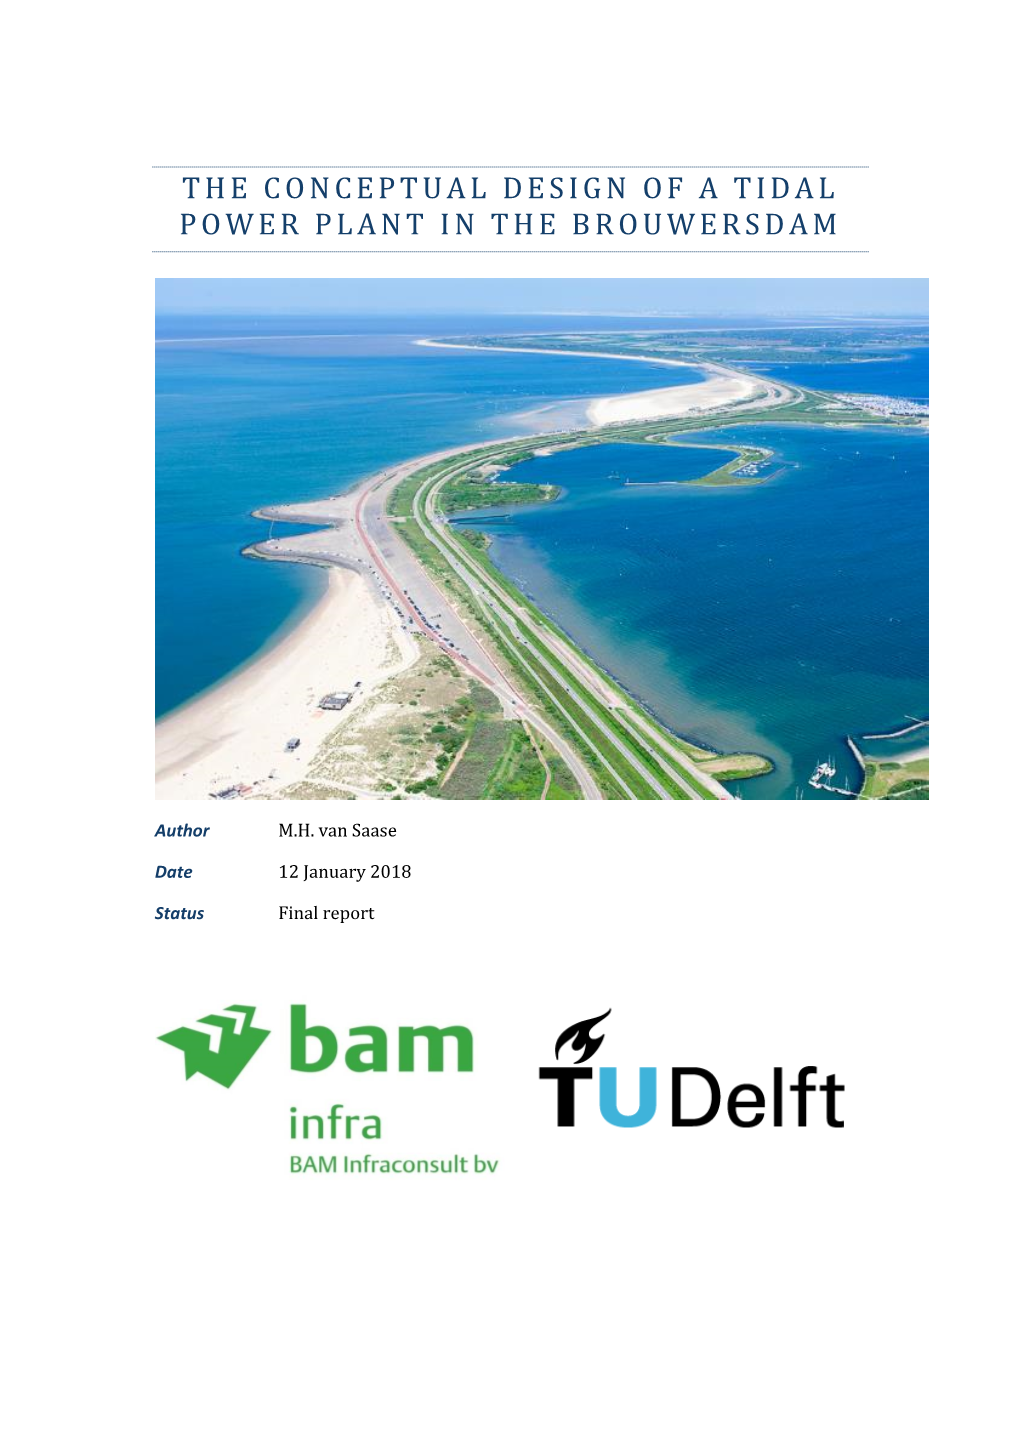 The Conceptual Design of a Tidal Power Plant in the Brouwersdam